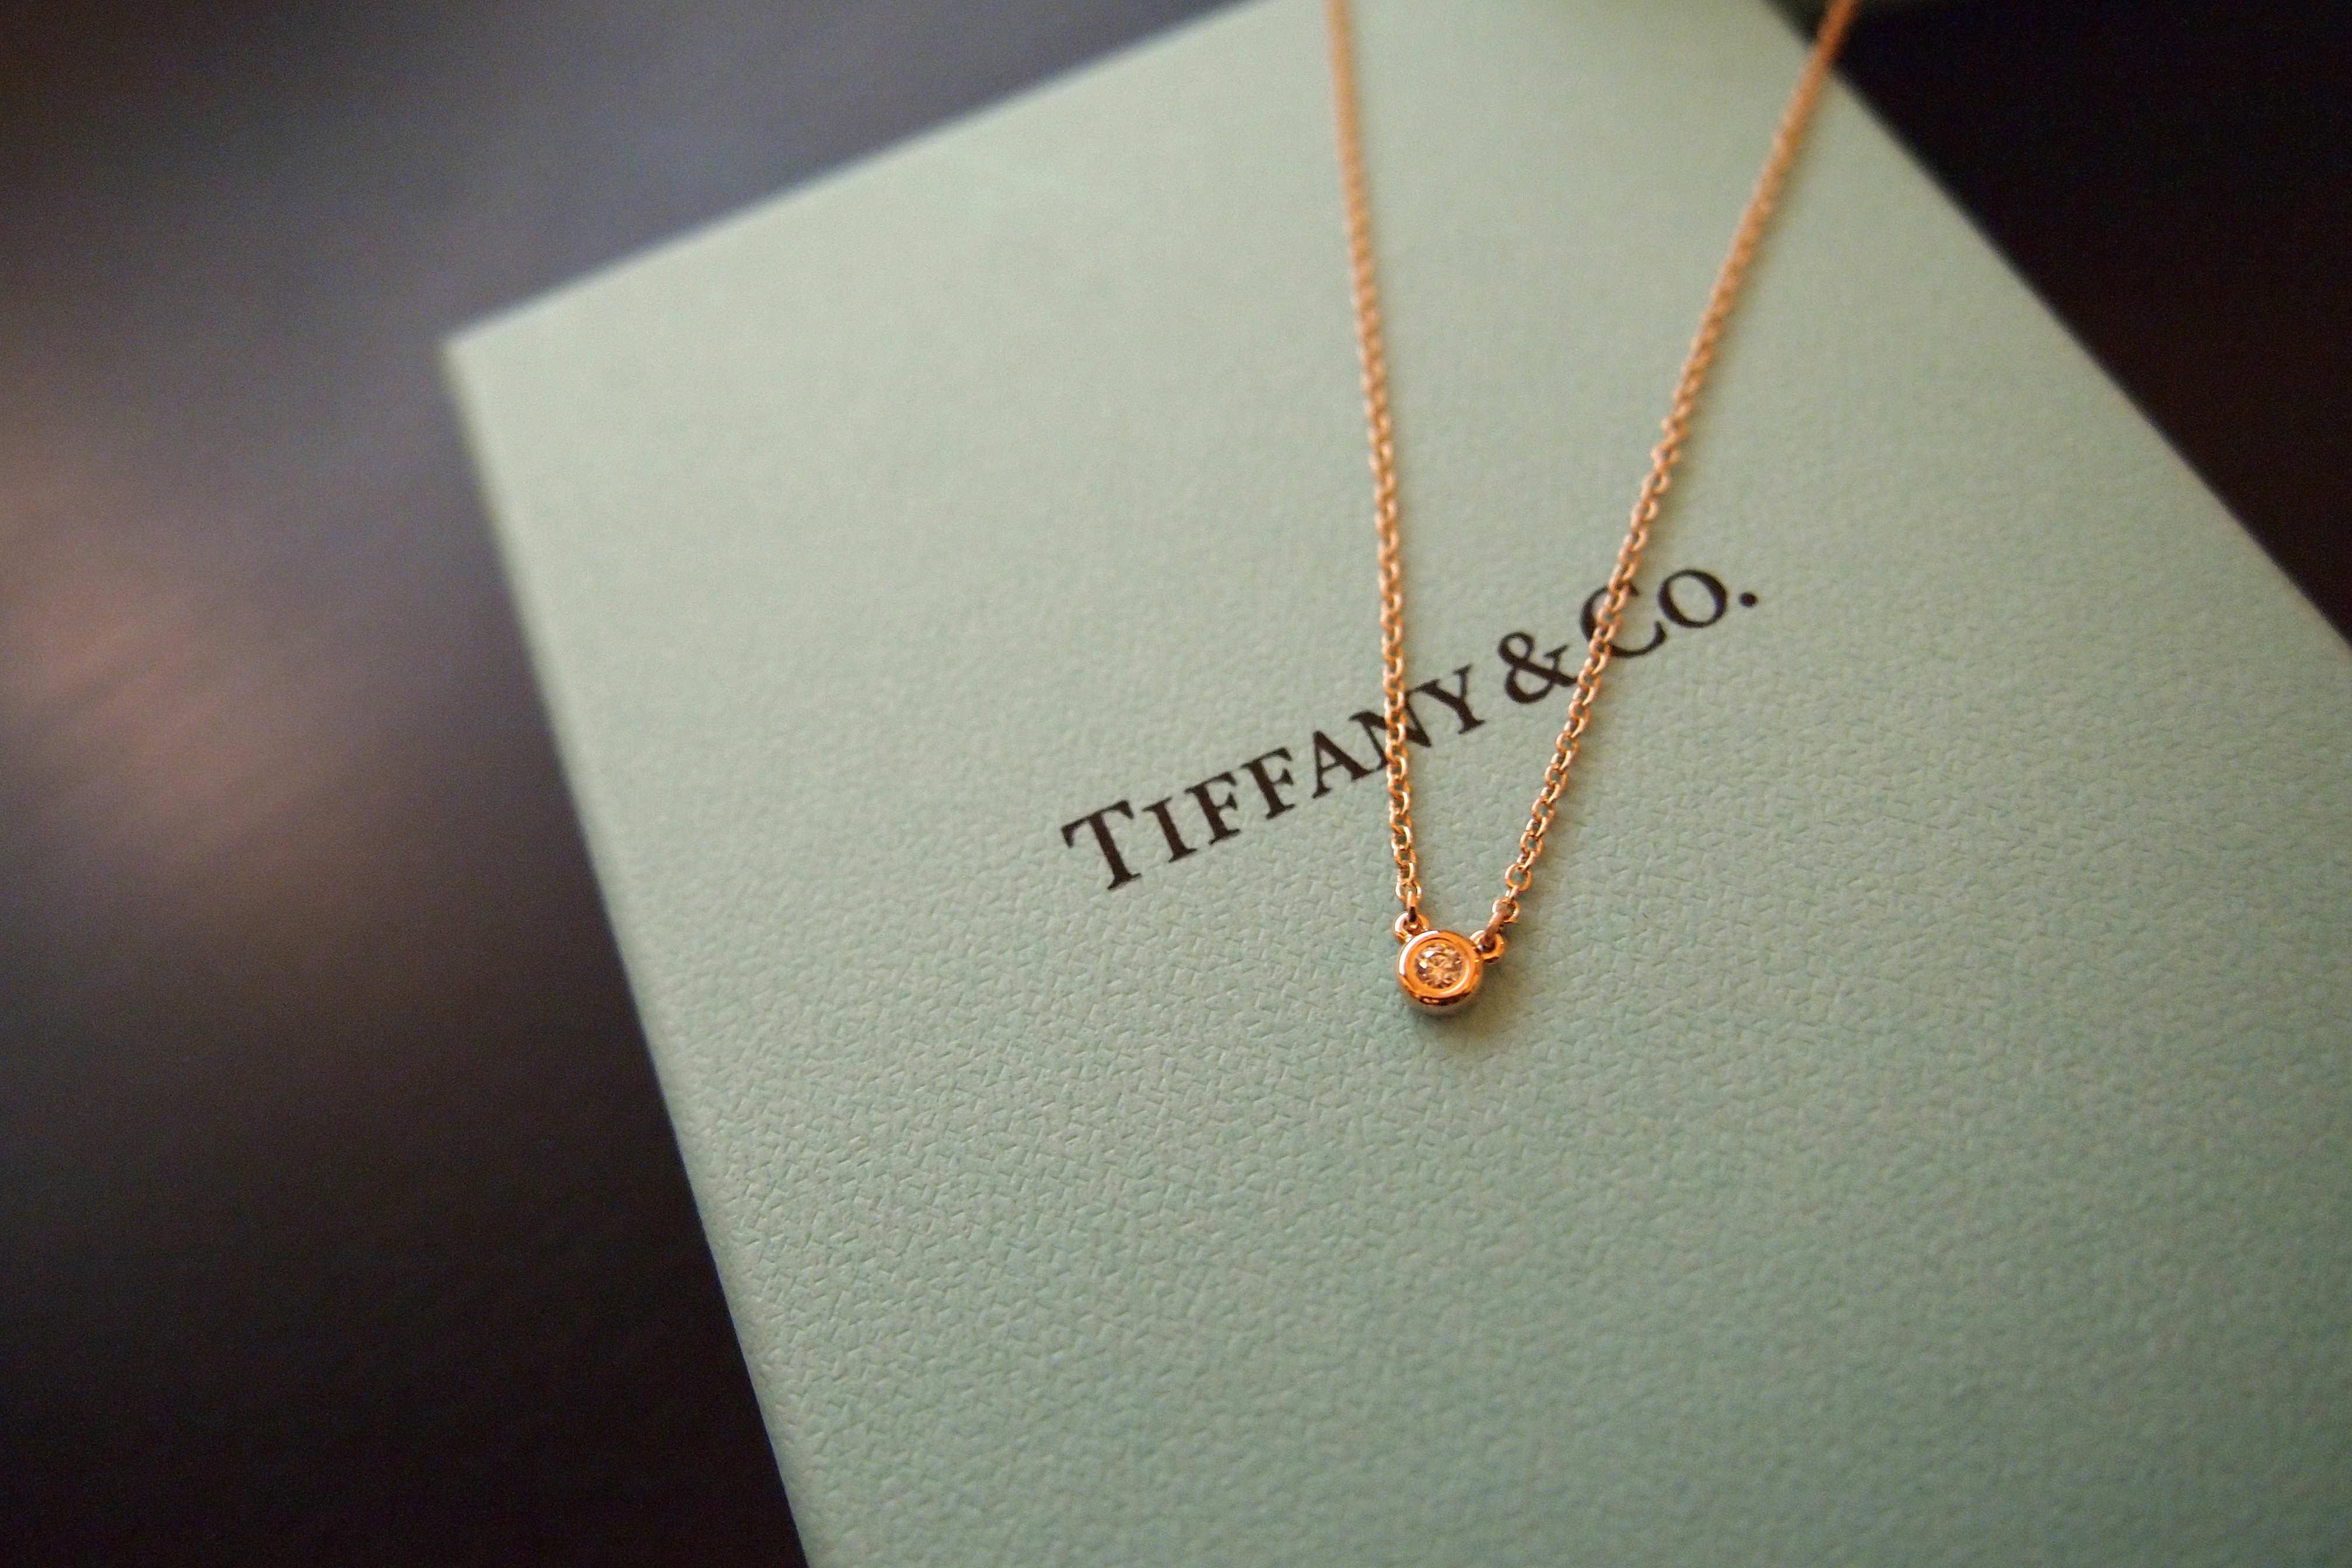 Where to Buy and Sell Tiffany & Co. Jewelry